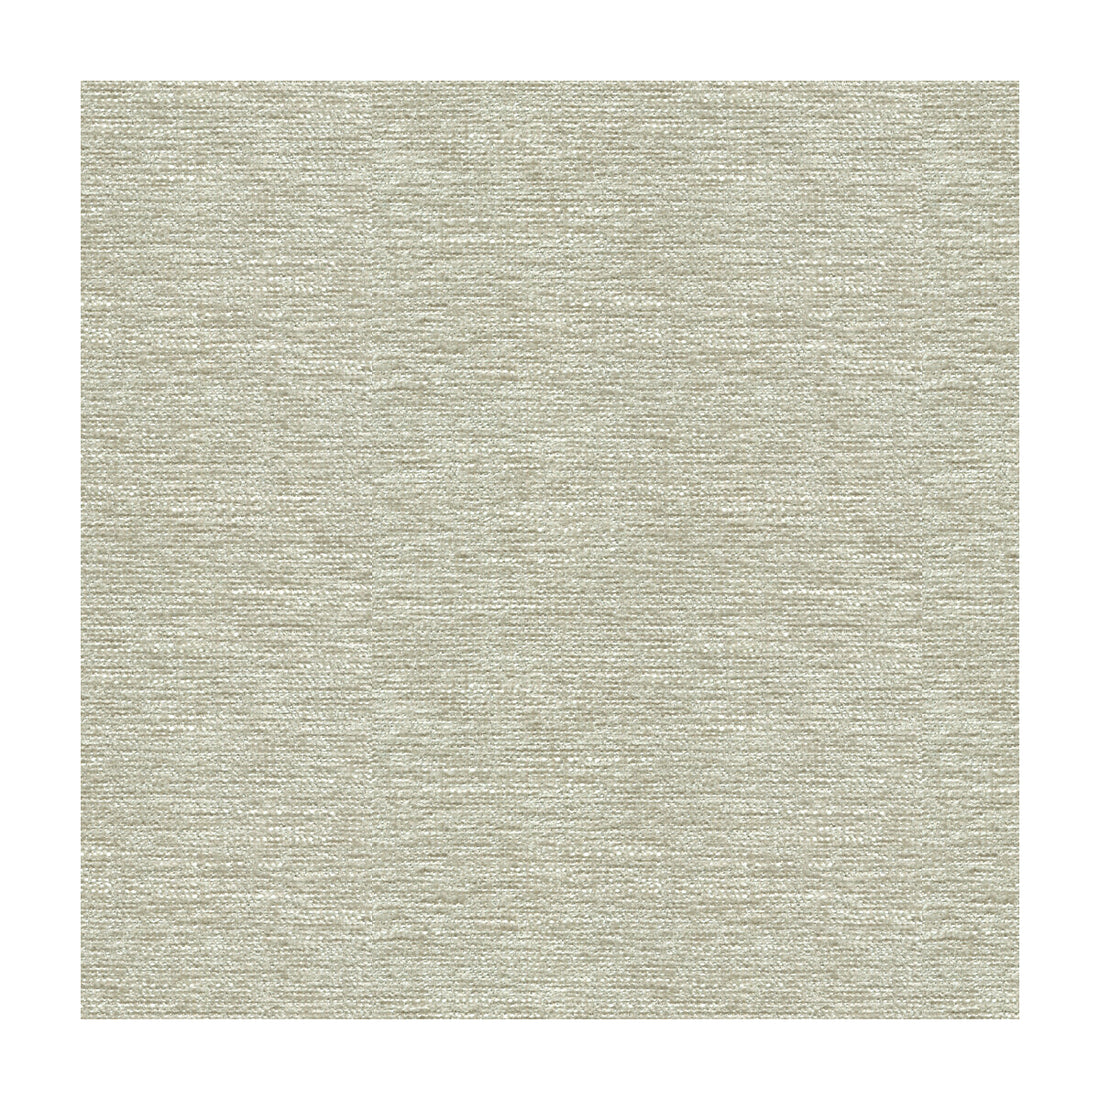 Beacon fabric in quartz color - pattern 34182.11.0 - by Kravet Contract in the Crypton Incase collection